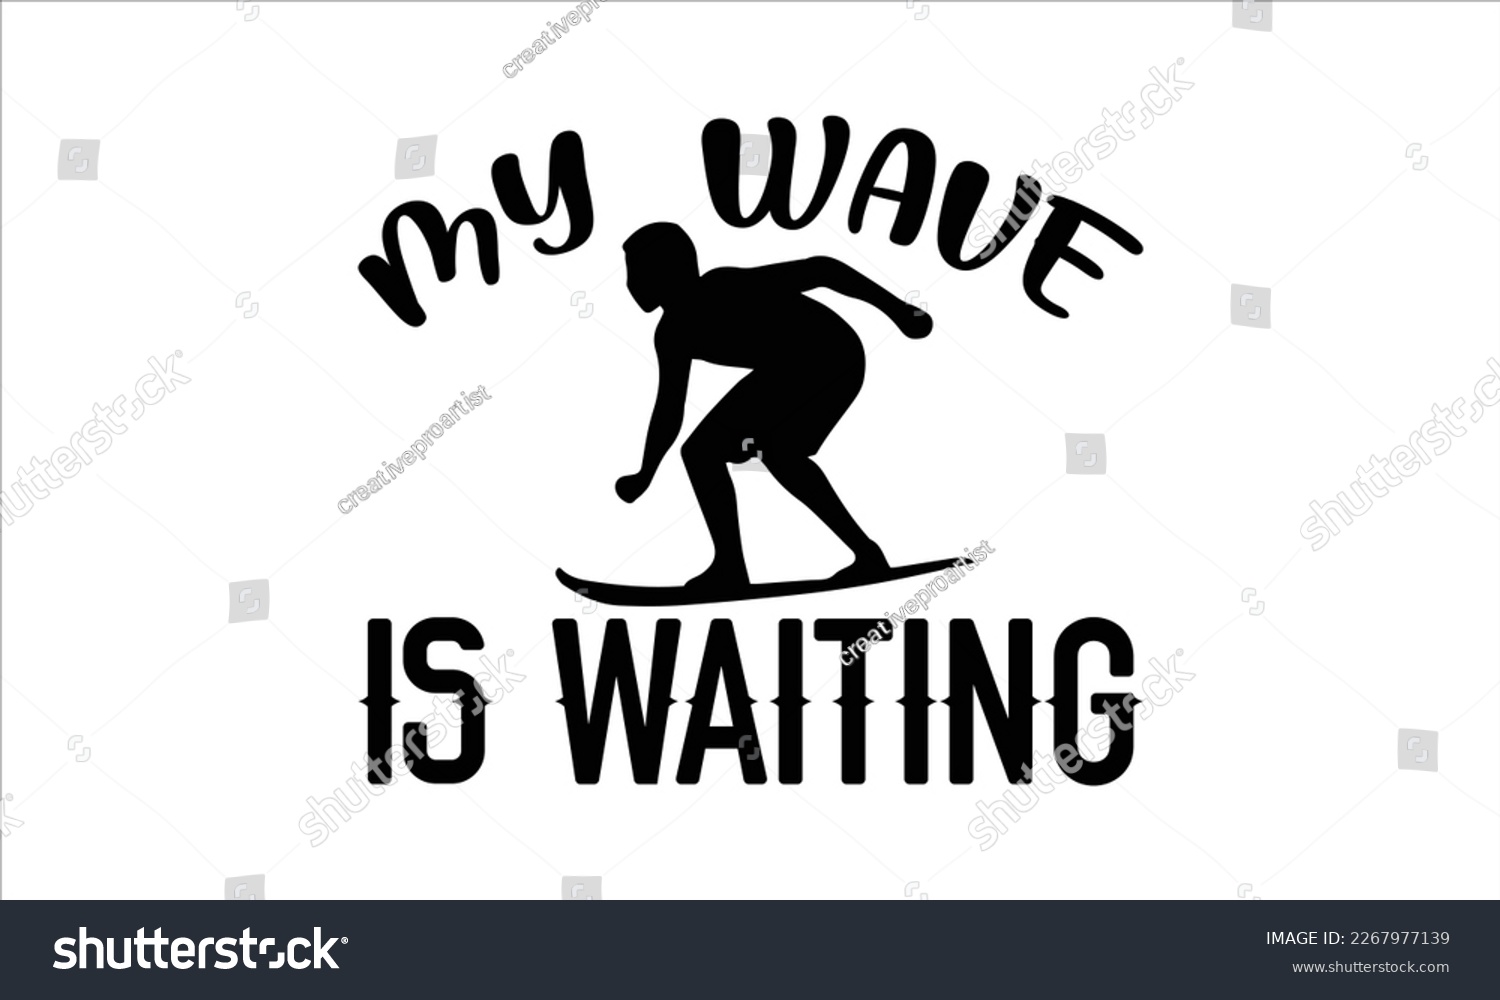 SVG of 
My wave is waiting- Surfing T-shirt Design, Vector illustration with hand-drawn lettering, prints and posters, Inspirational vector typography, svg eps 10 svg